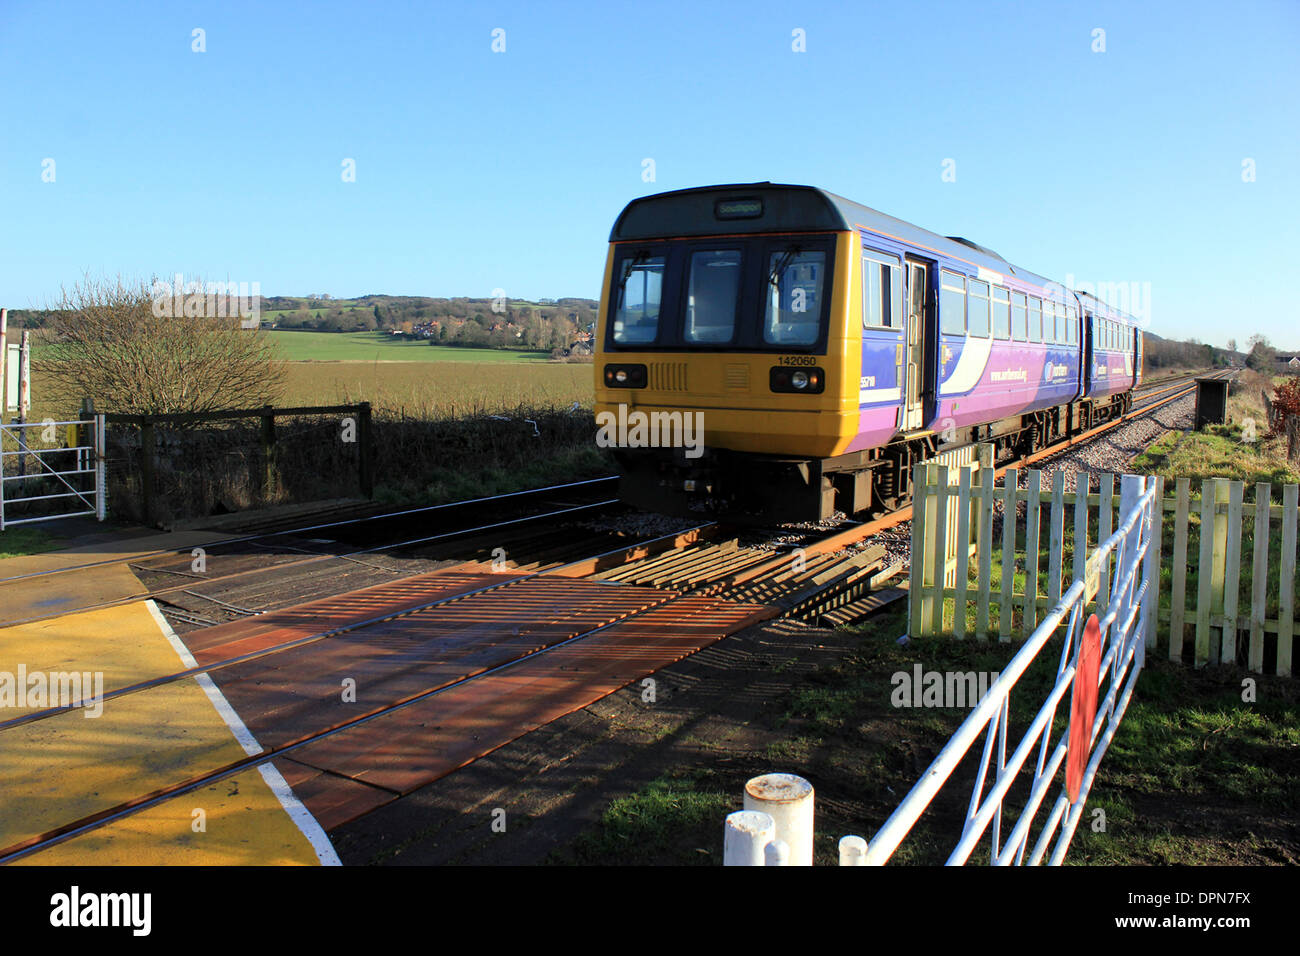 A train owned by Northern rail Pacer no142060 approaches an un-manned level crossing in West Lancashire Stock Photo